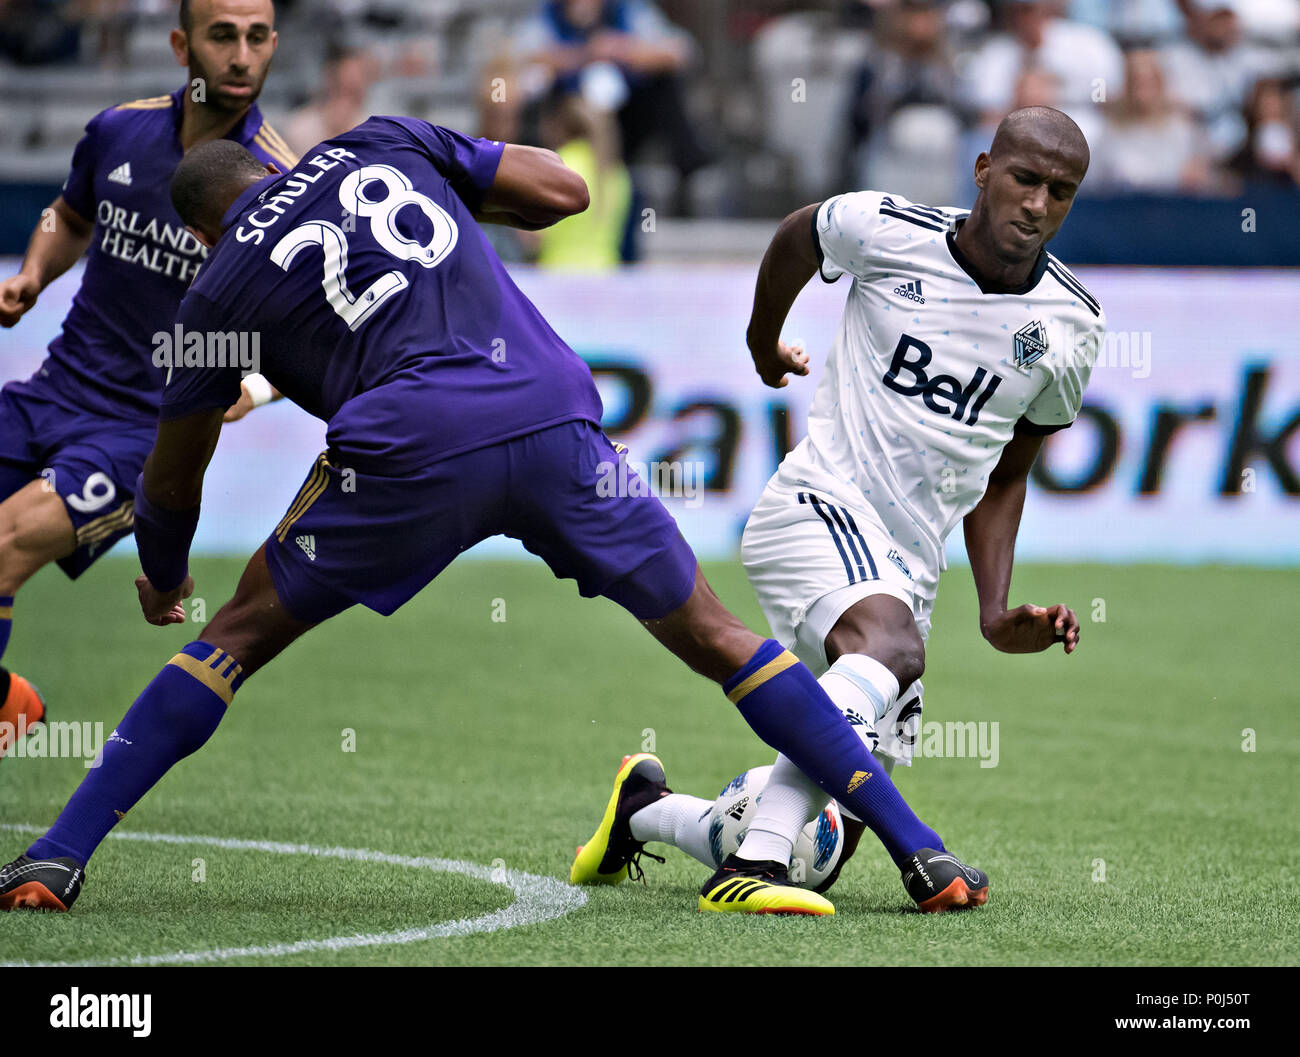 Vancouver. 10th June, 2018. Aly Ghazal (R) of Vancouver Whitecaps vies with Chris Schuler of Orlando City SC during a regular season MLS match at BC Place in Vancouver, June, 9, 2018. The Vancouver Whitecaps won 5-2. Credit: Andrew Soong/Xinhua/Alamy Live News Stock Photo